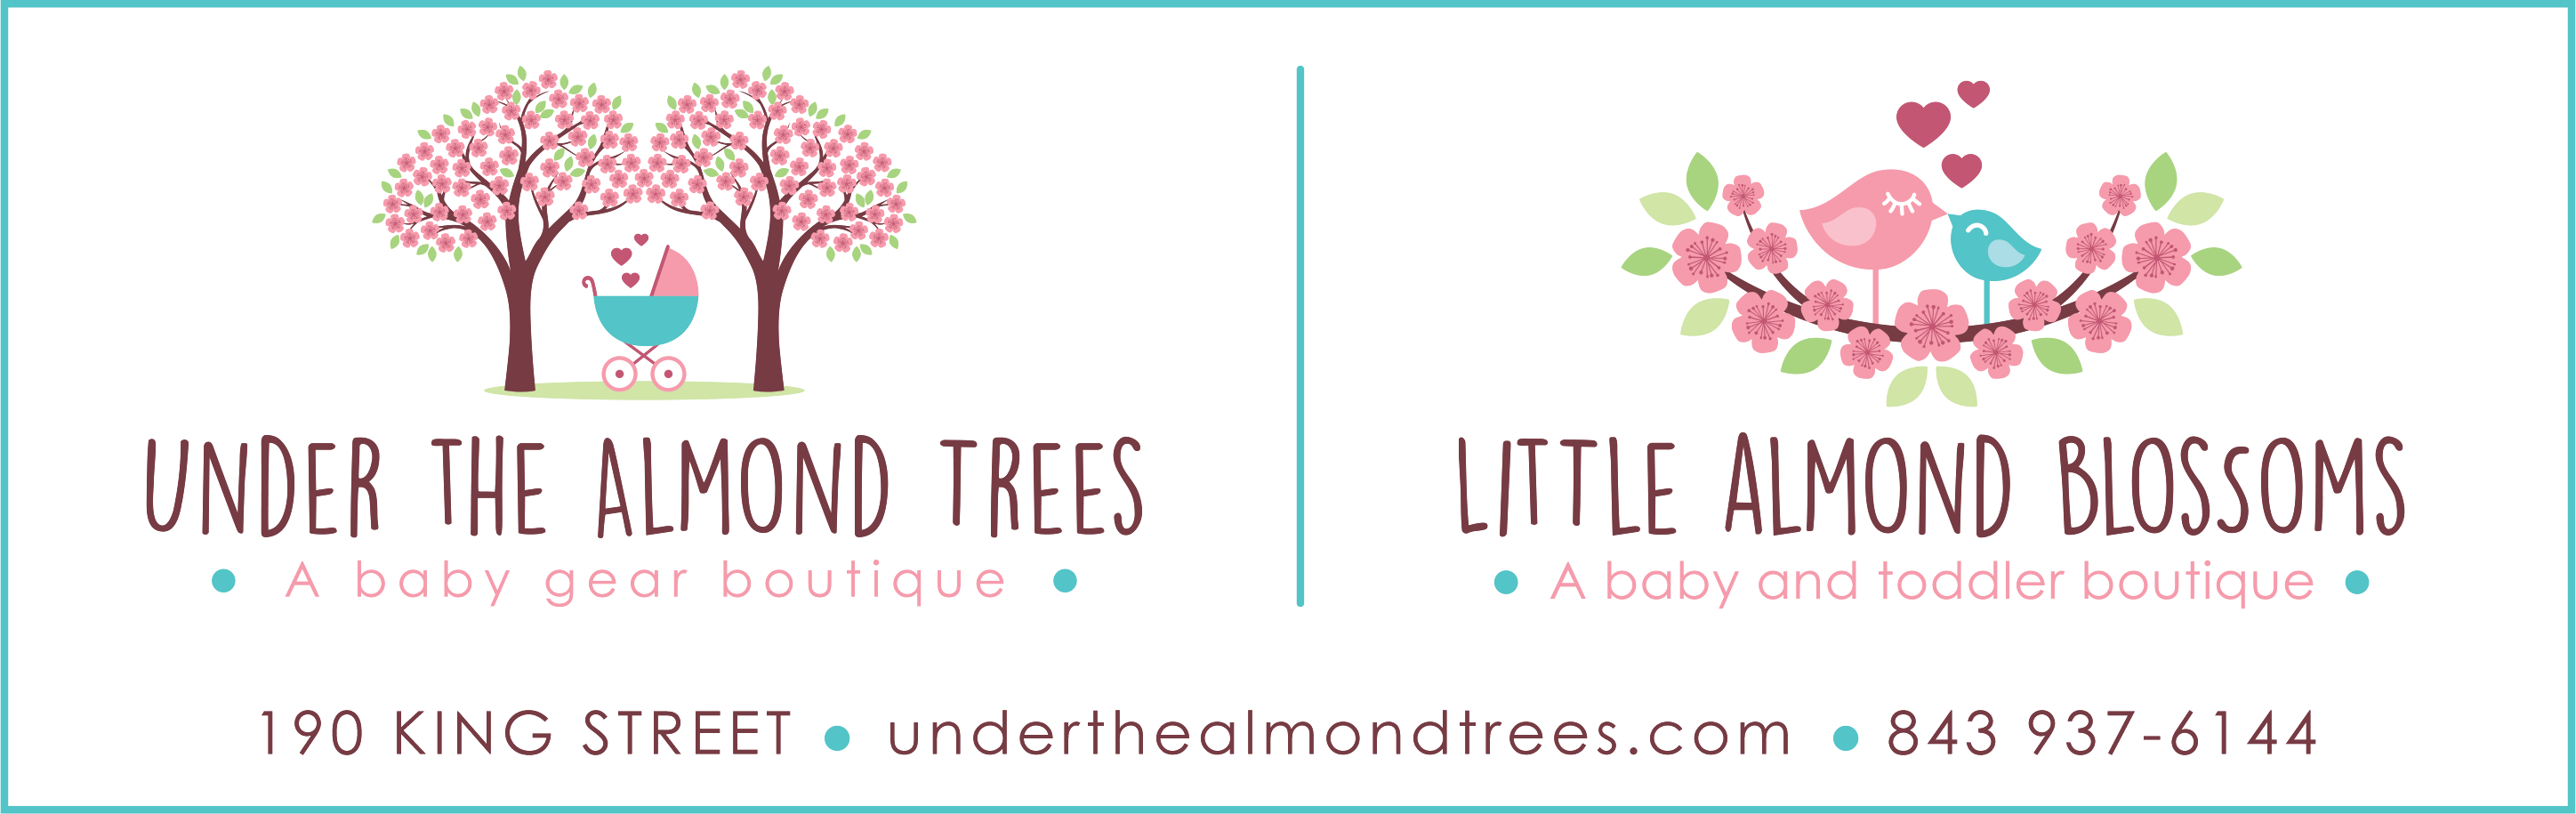 Under the Almond Trees Print Ad